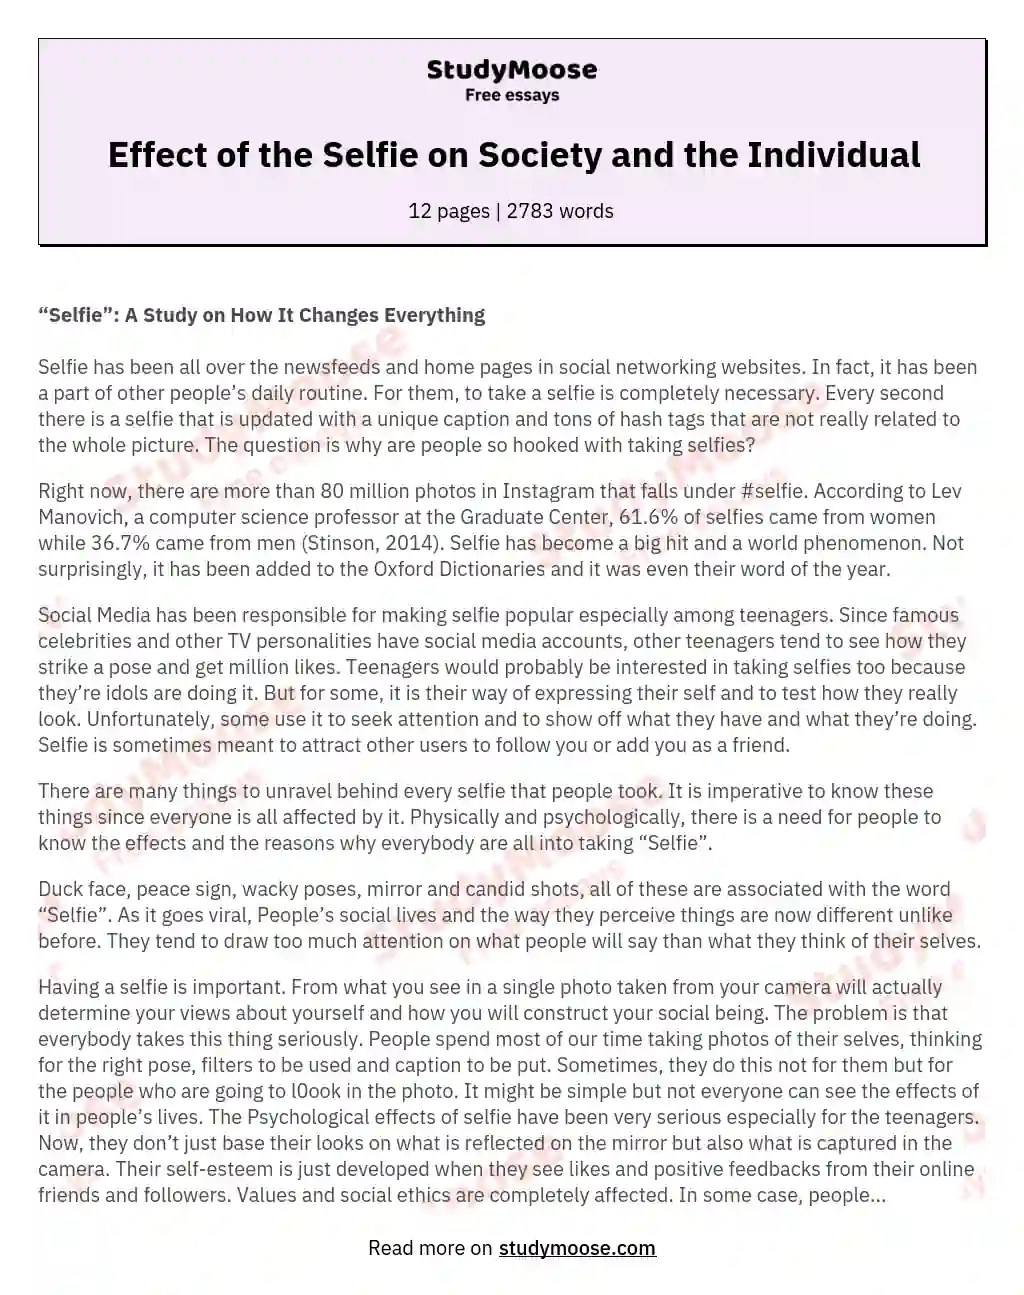 Effect of the Selfie on Society and the Individual essay